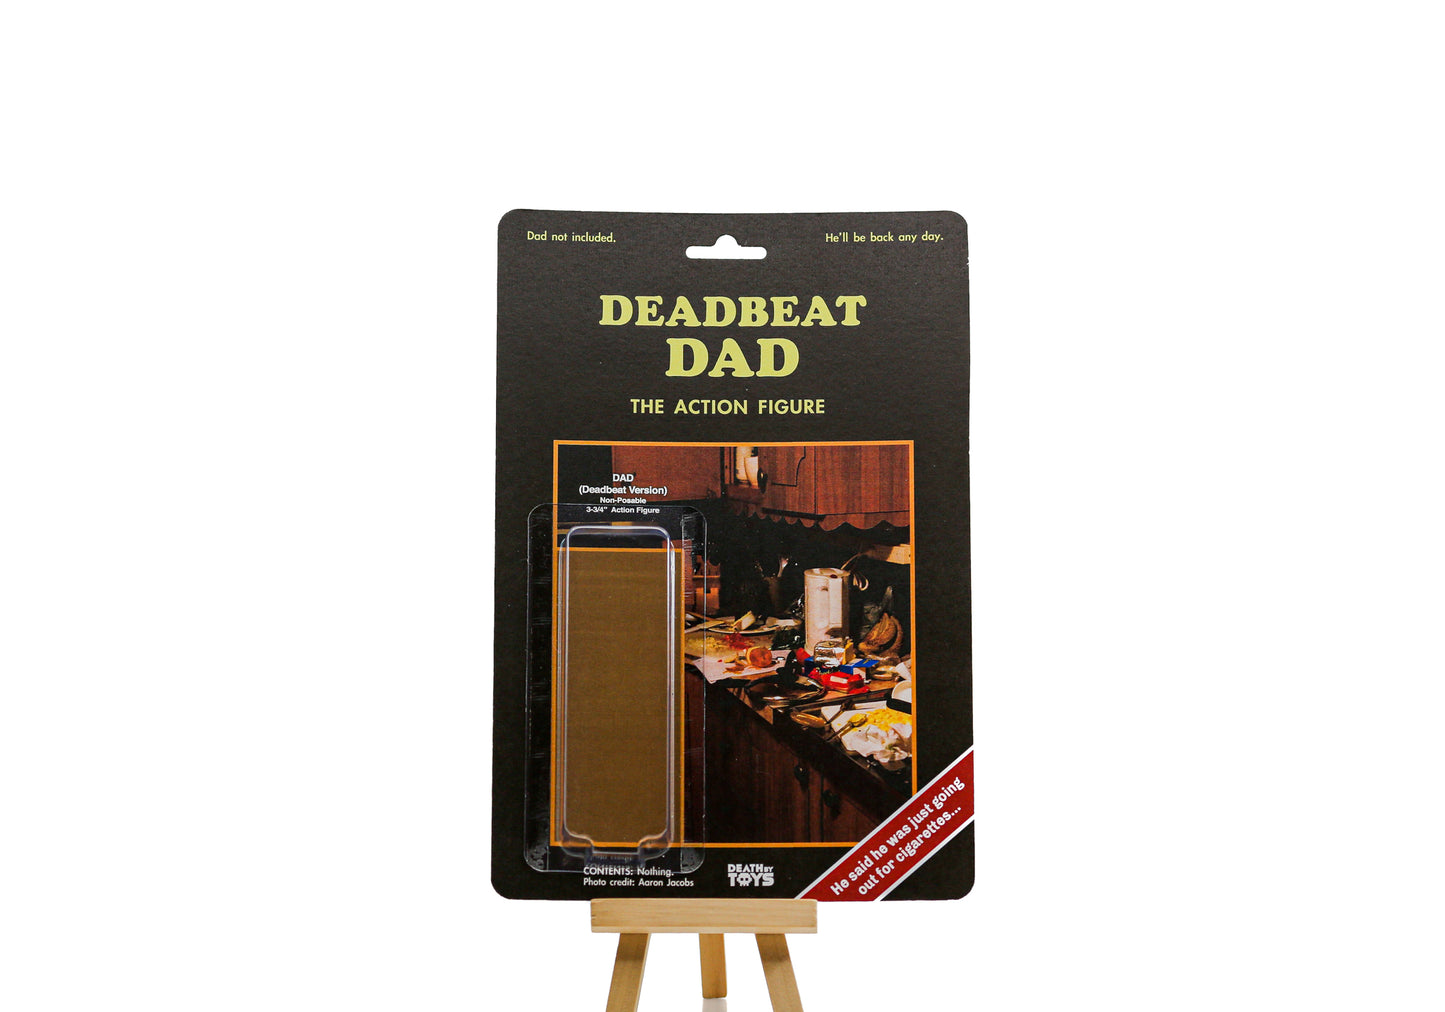 DeathByToys "Dead Beat Dad" Action Figure